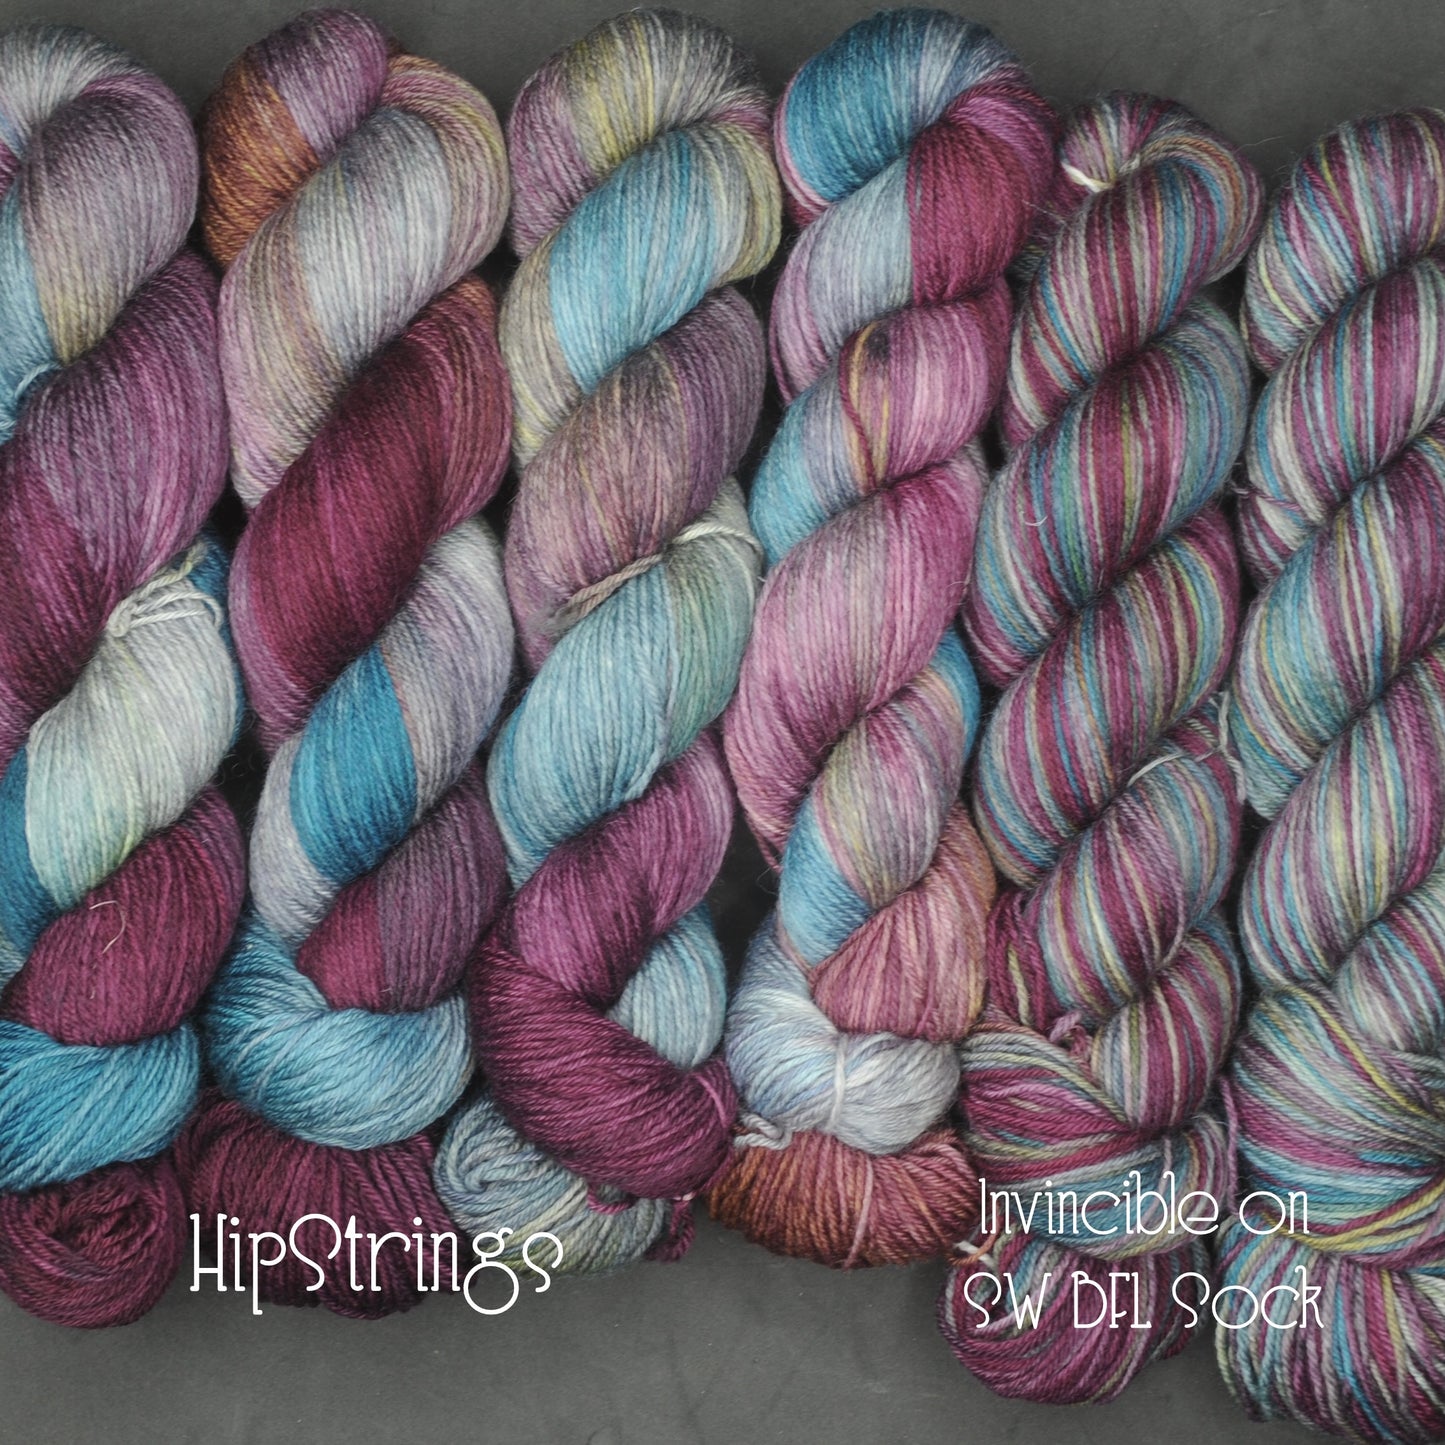 Invincible on Hand Dyed SW Blue Faced Leicester Sock Yarn - 437 yd